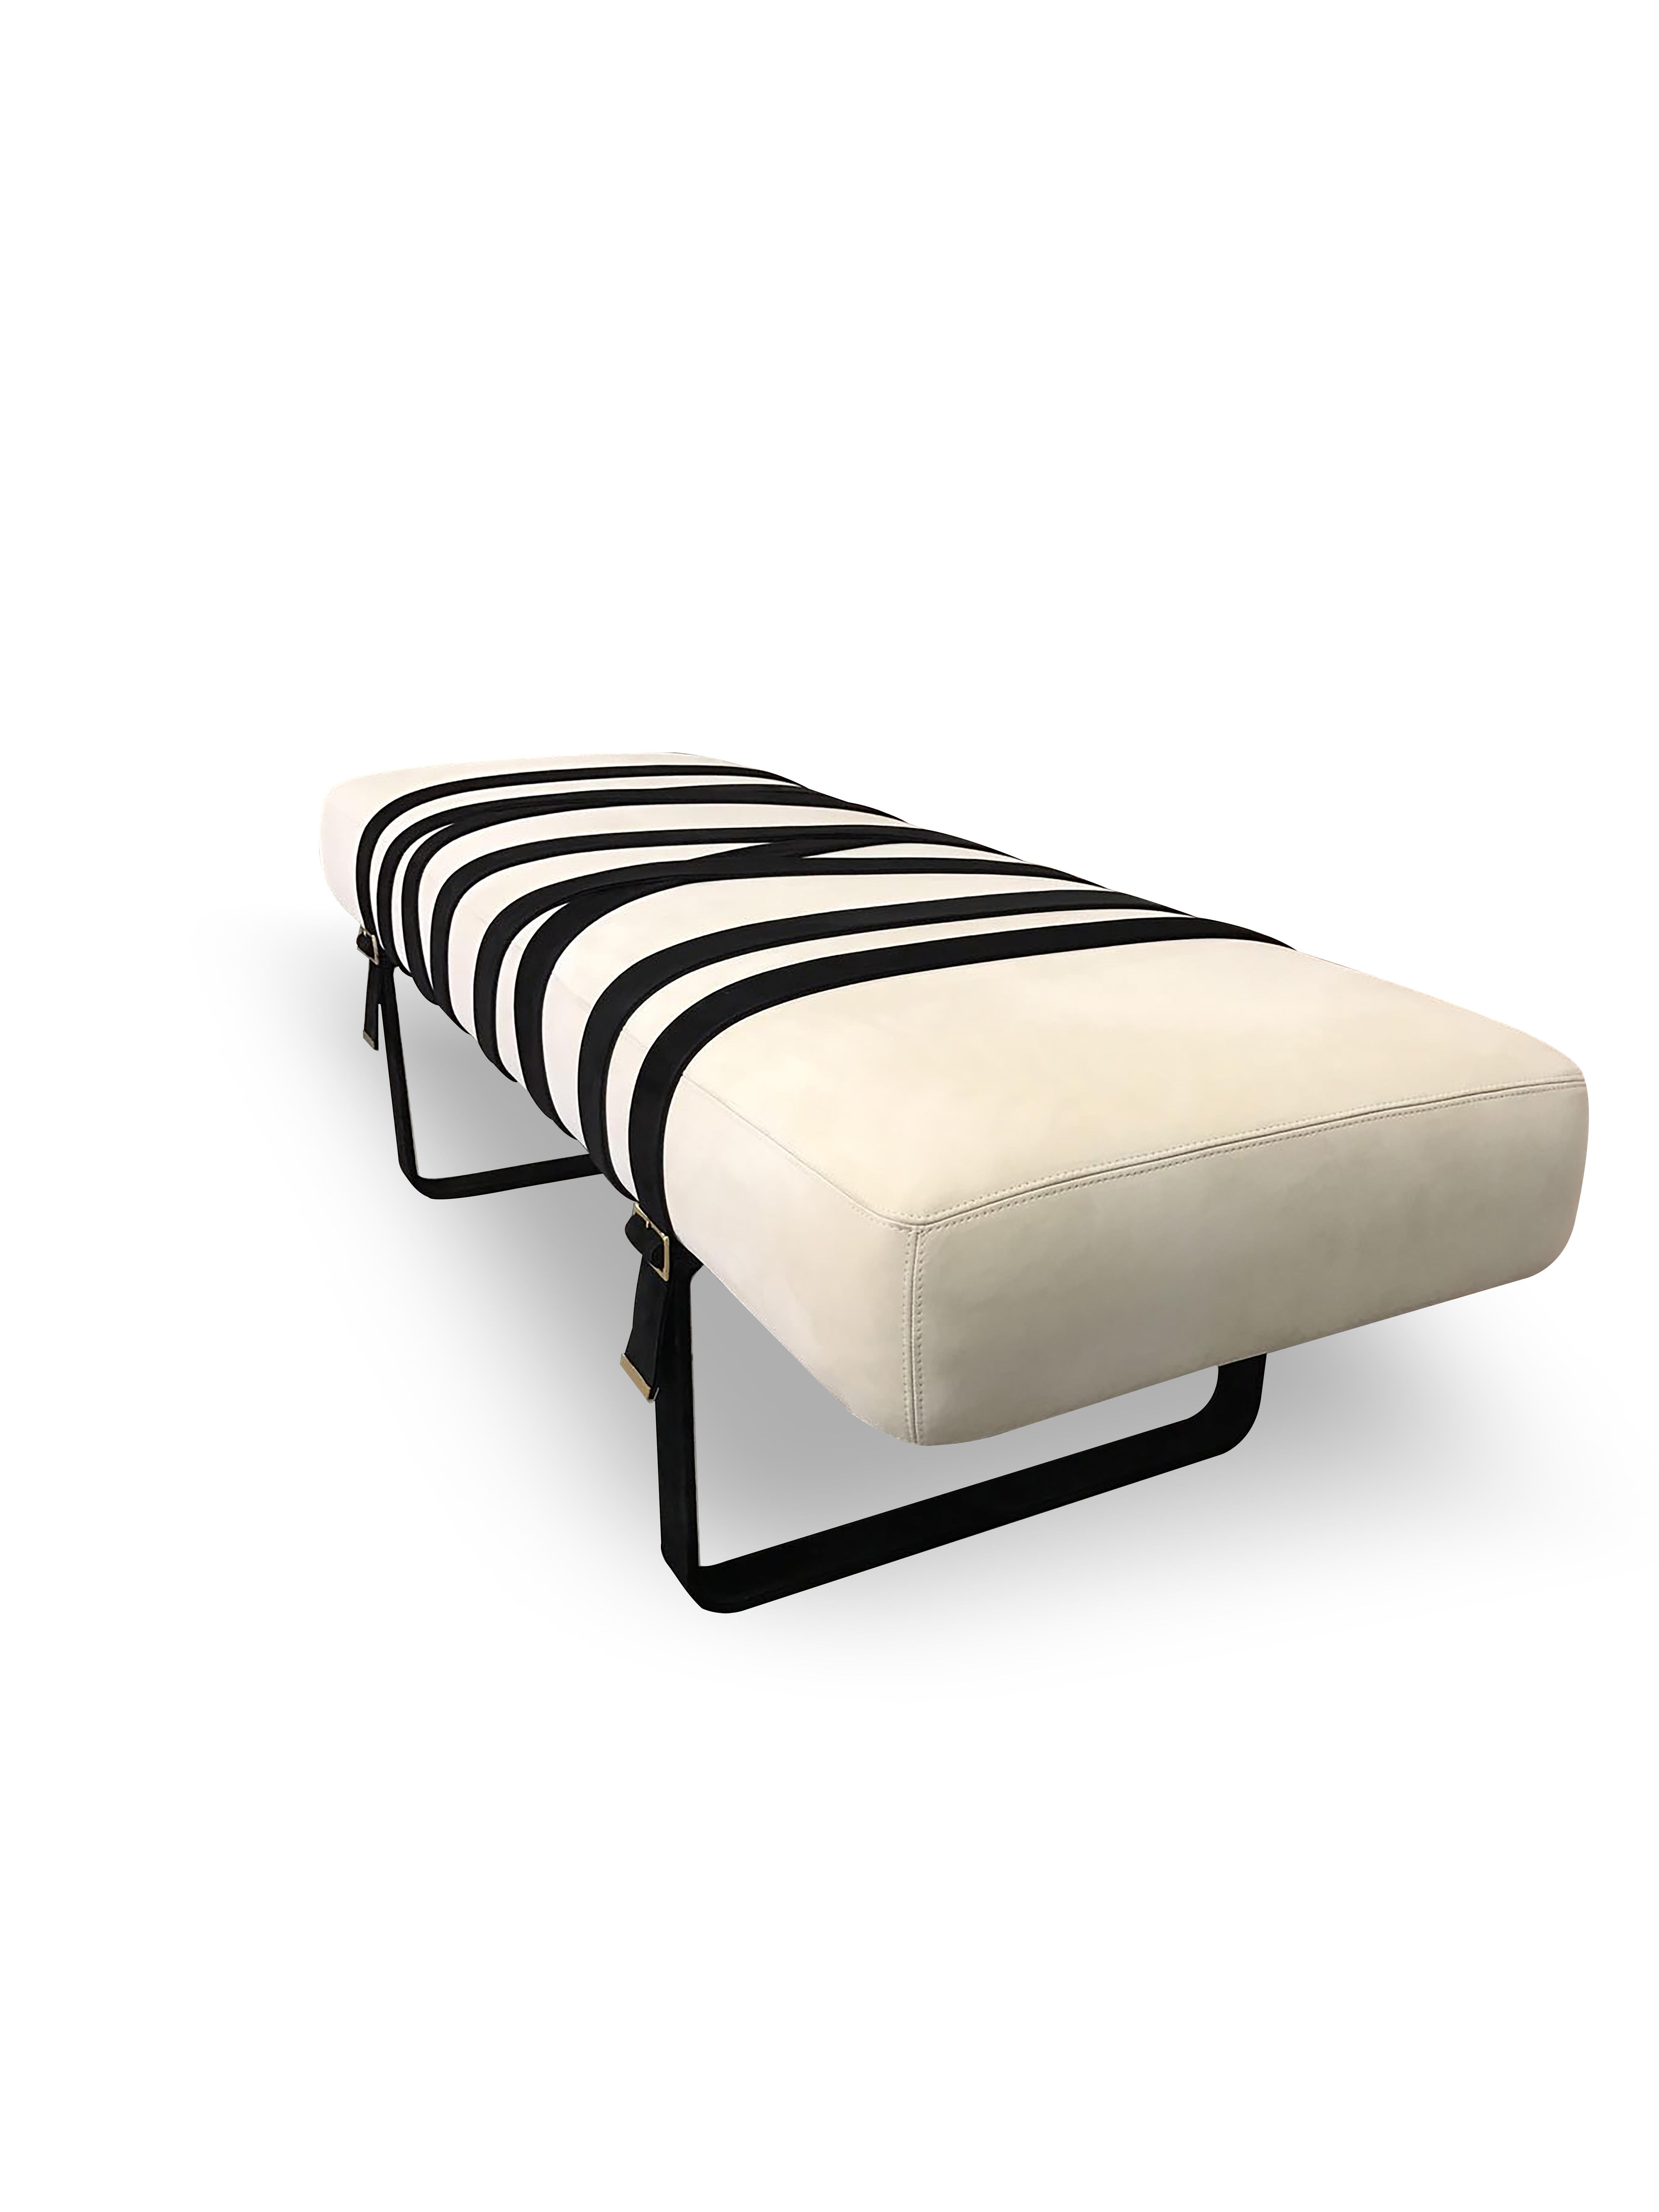 Inspired by the sensual fashion of Italy this modern leather bench lets you indulge in haute furniture design. The softly upholstered seat rests on the leather belt that wraps around the entire bench as the fashion-inspired design detail. 

As